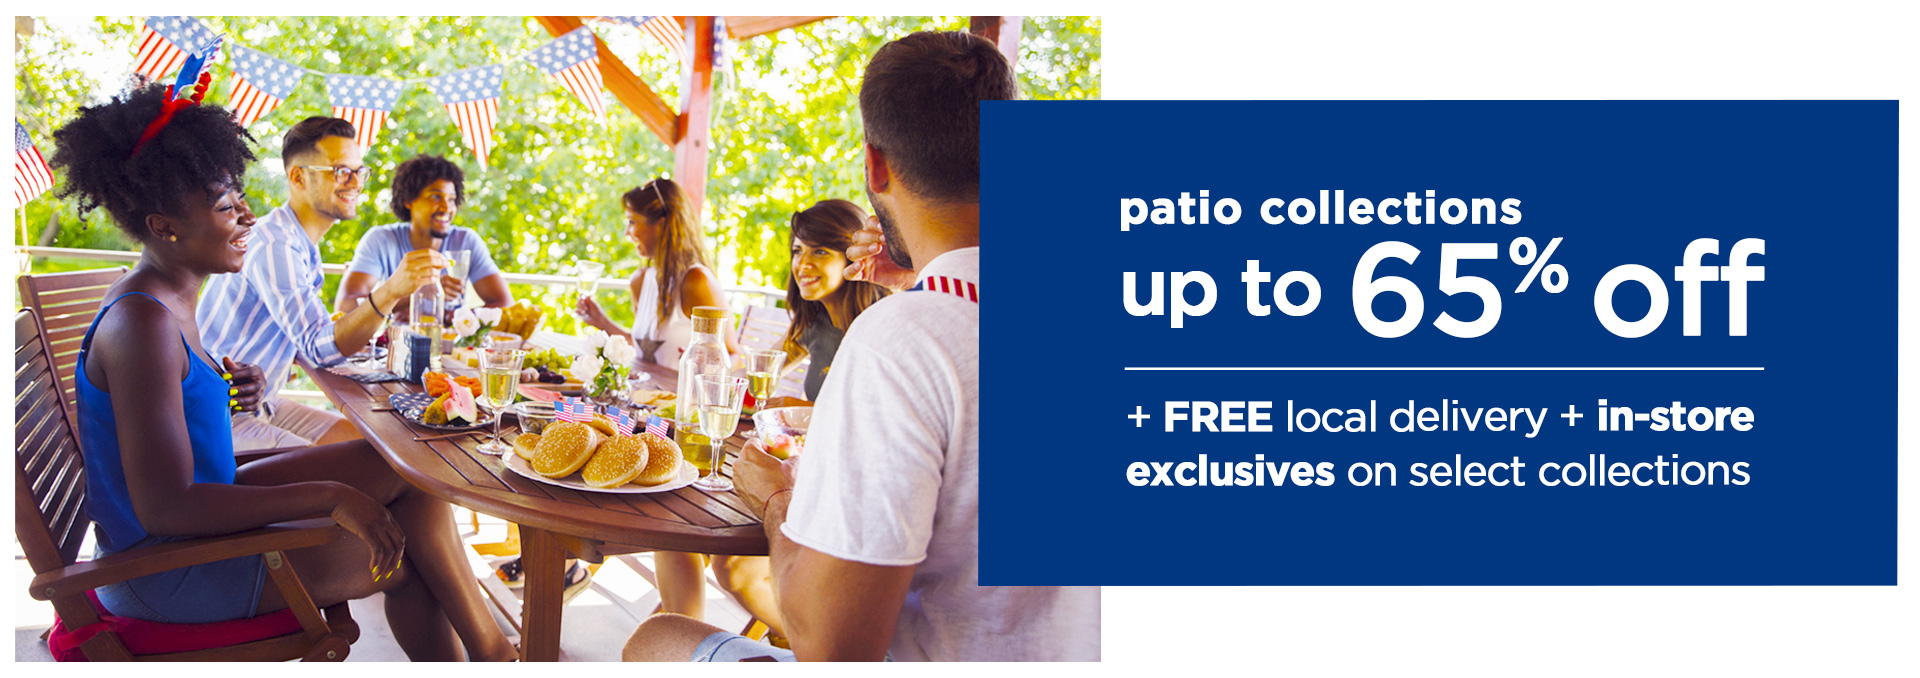 Save up to 65% patio collections plus free local delivery and installation, with in-store exclusives for mom at your local Great Escape